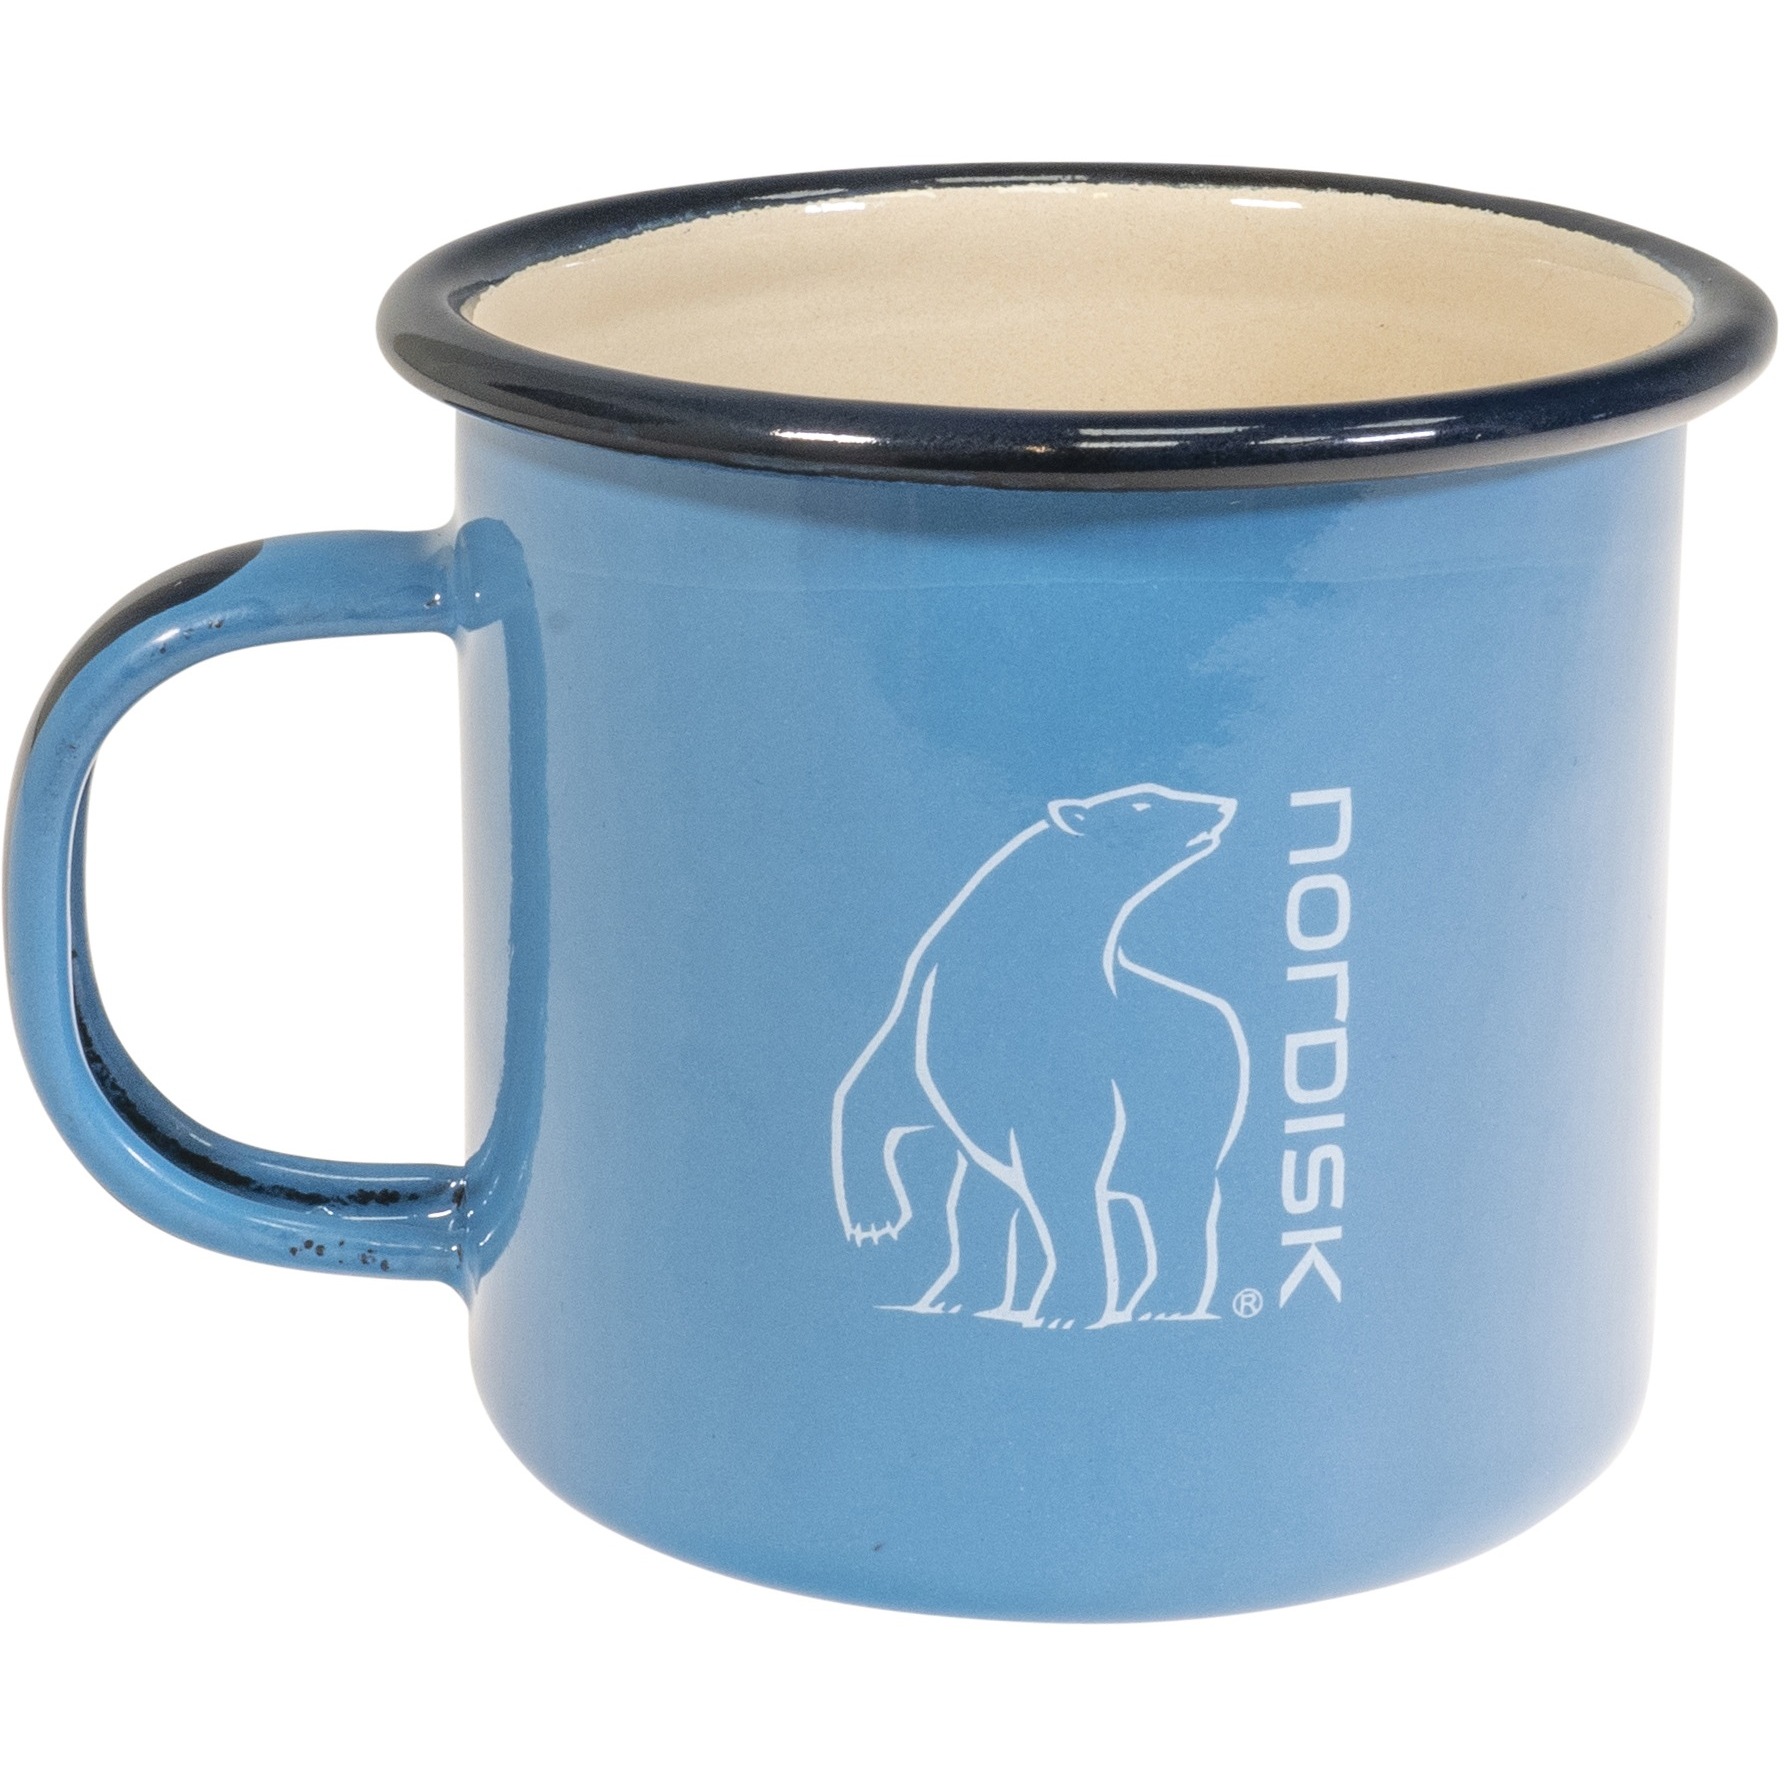 Picture of Nordisk Madam Blå Cup Large 350ml - sky blue